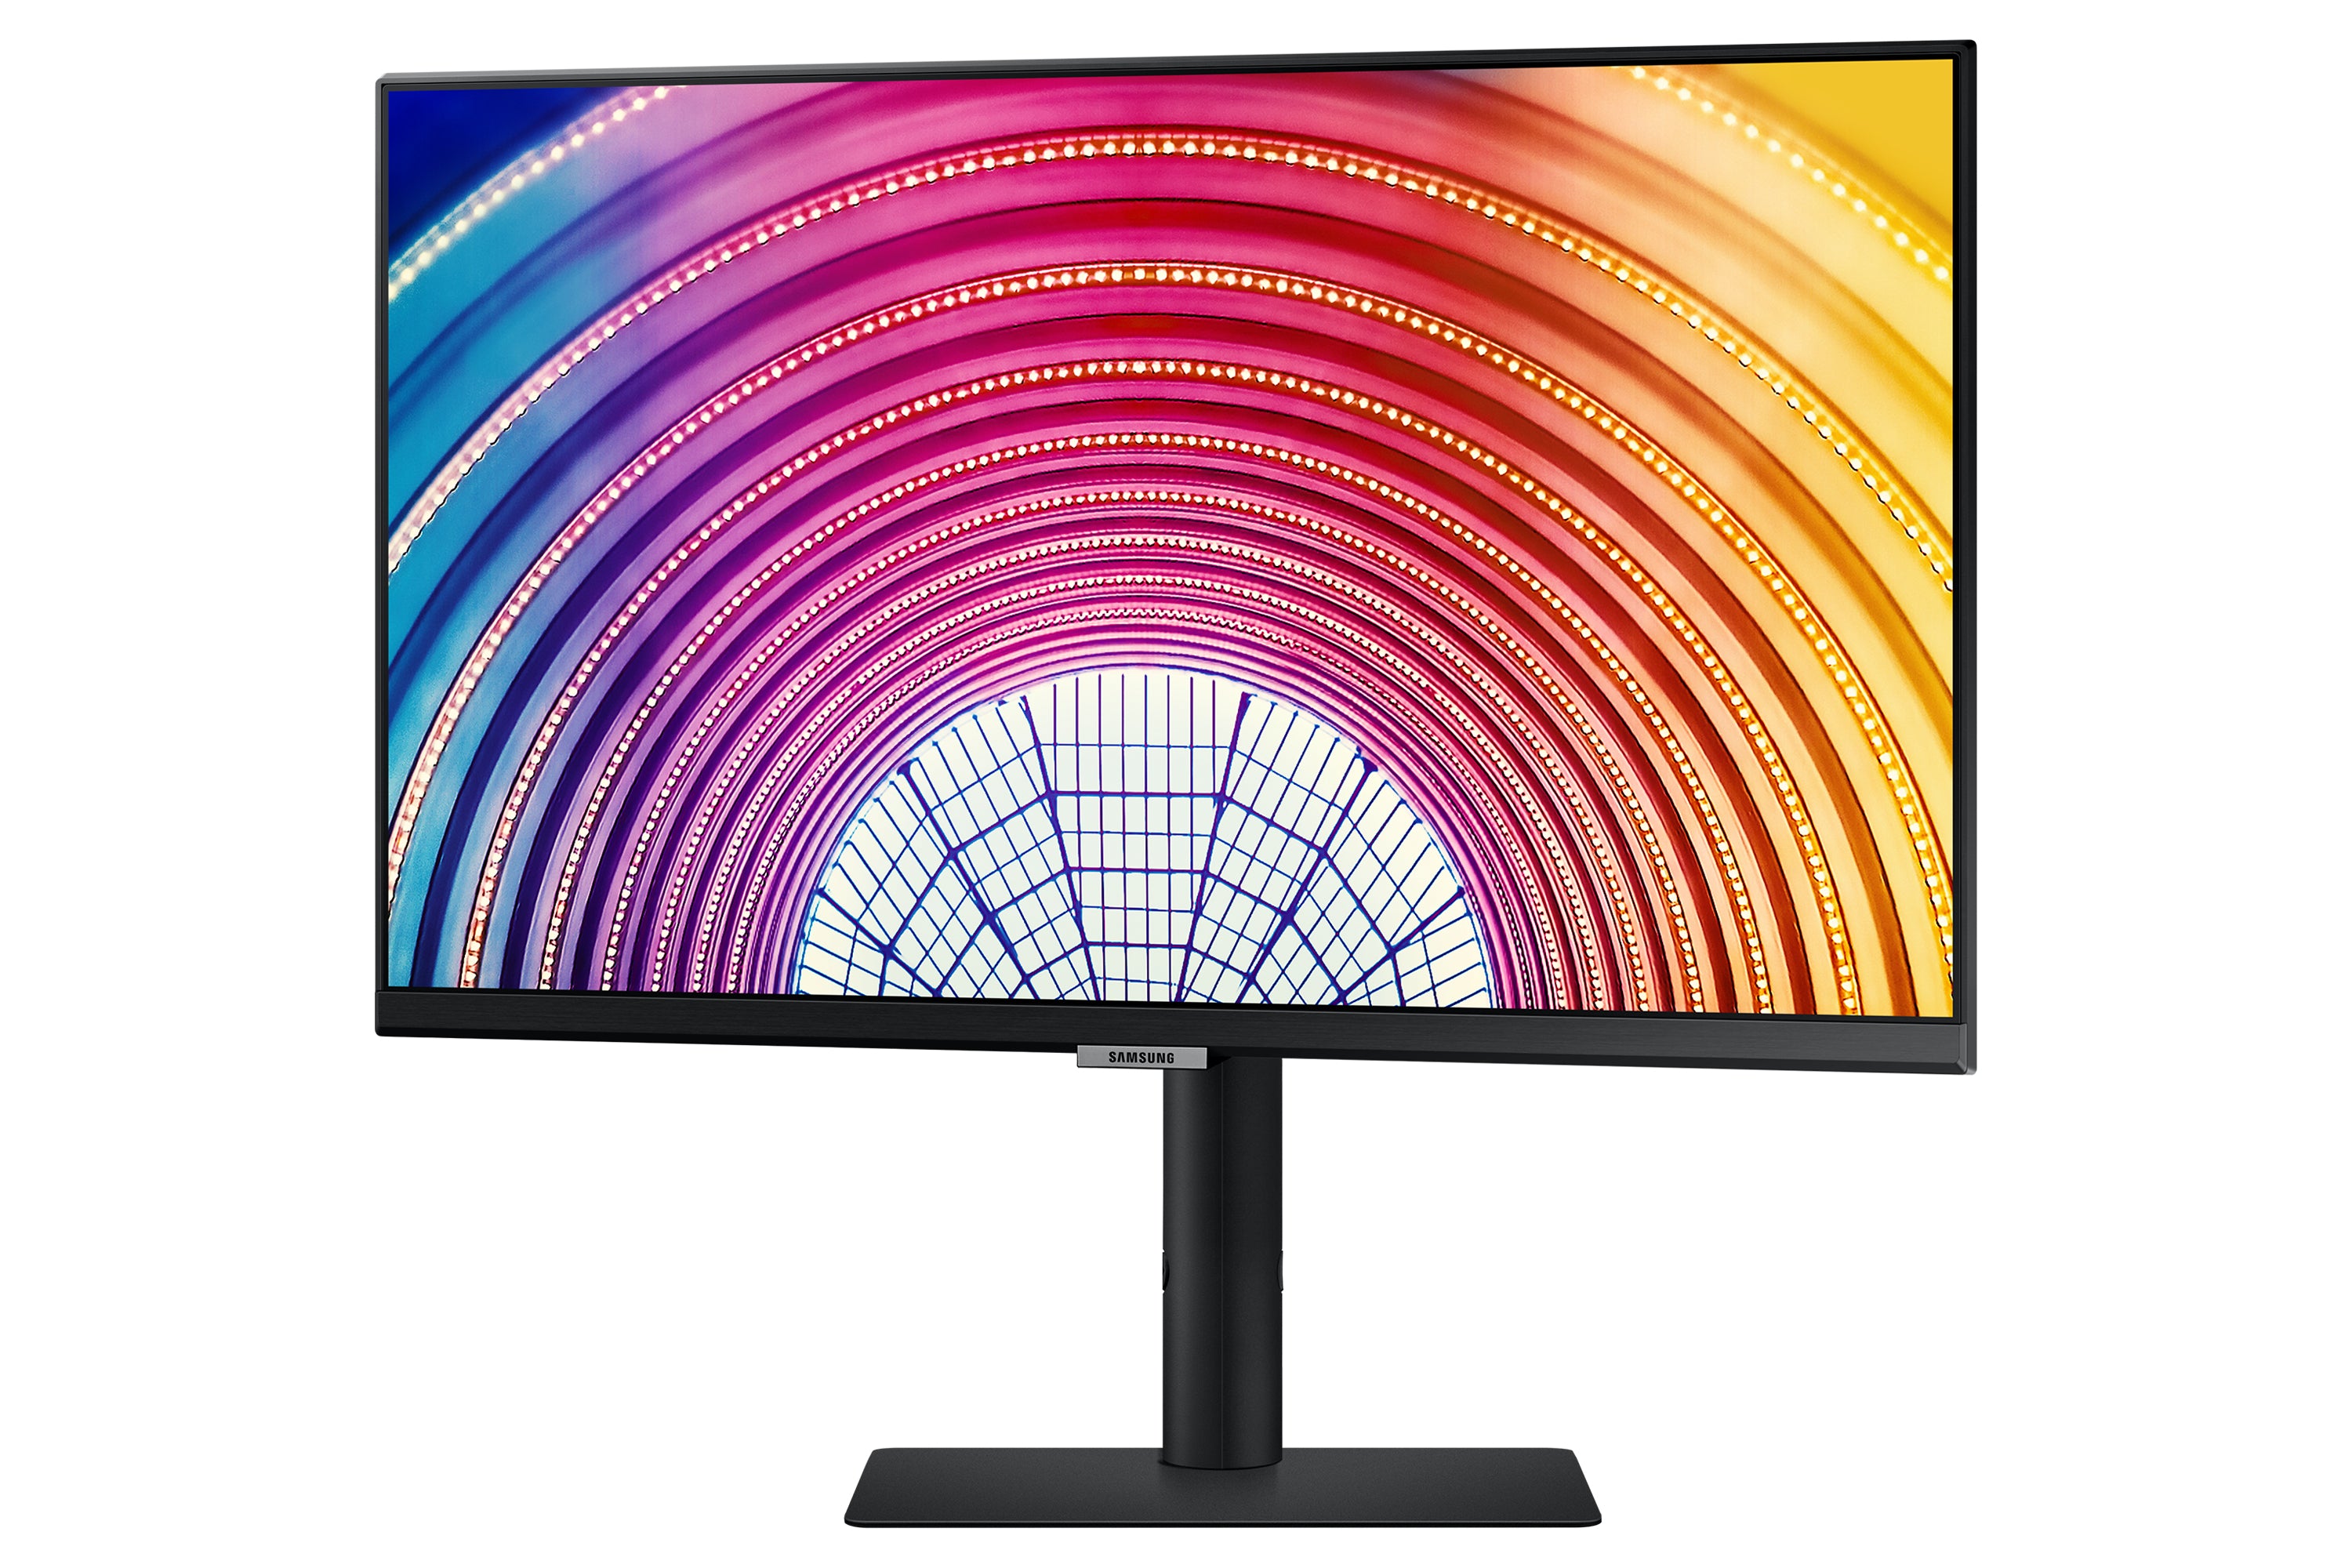 SAMSUNG S24A600 23,8" 16:9 2560X1440 IPS, 5MS, HDR10, HAS, HDMI/DP.